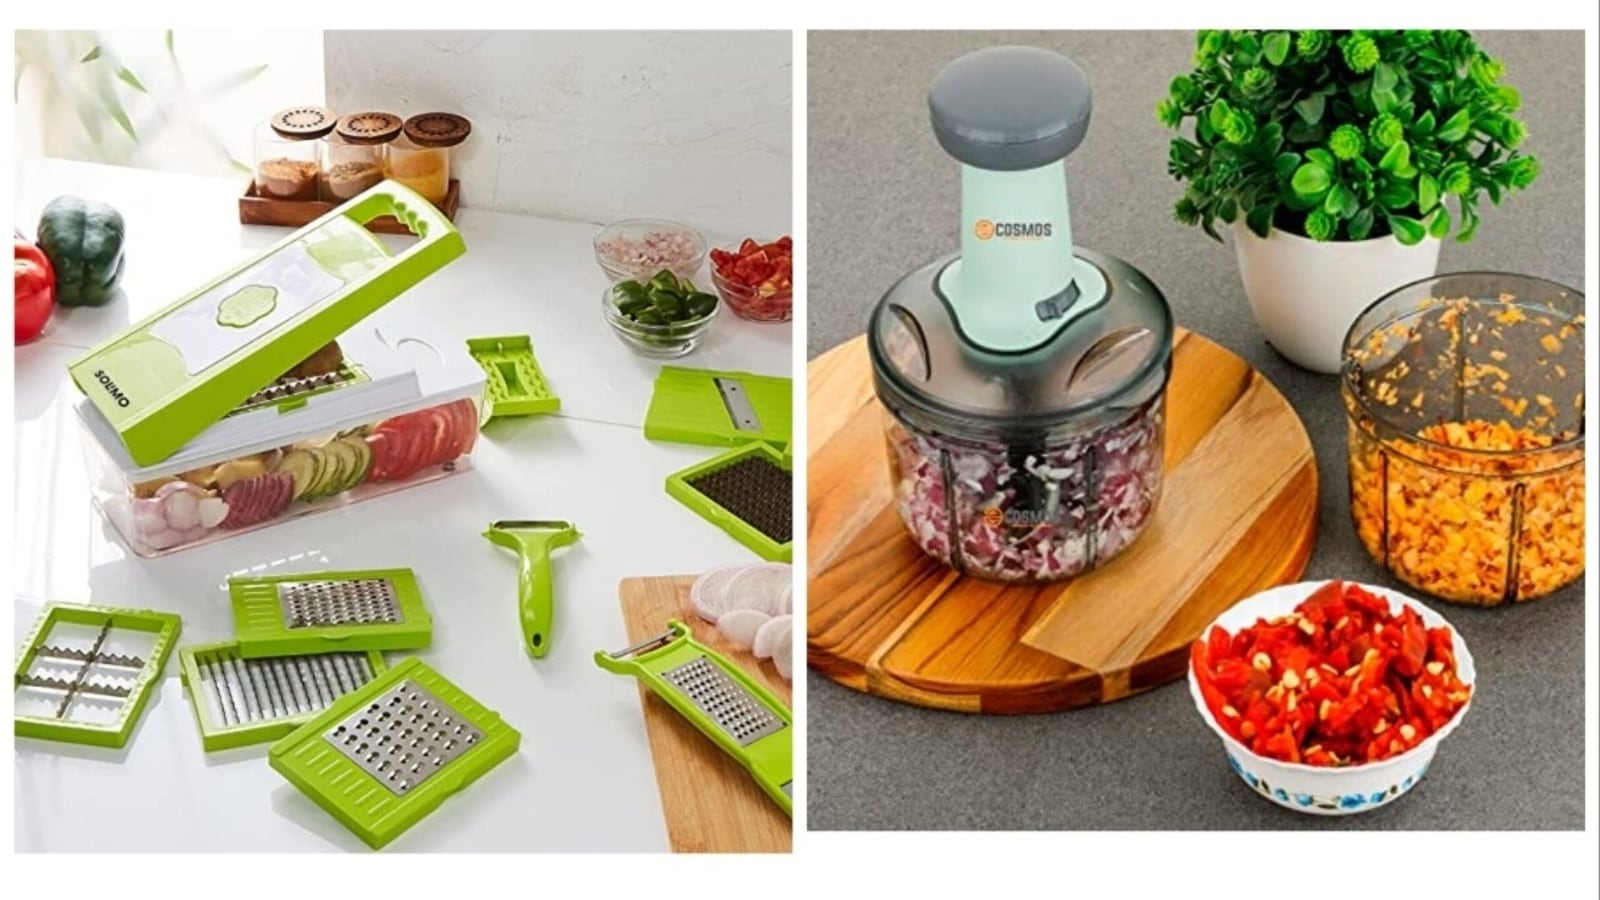 Best Vegetable Choppers for 2023